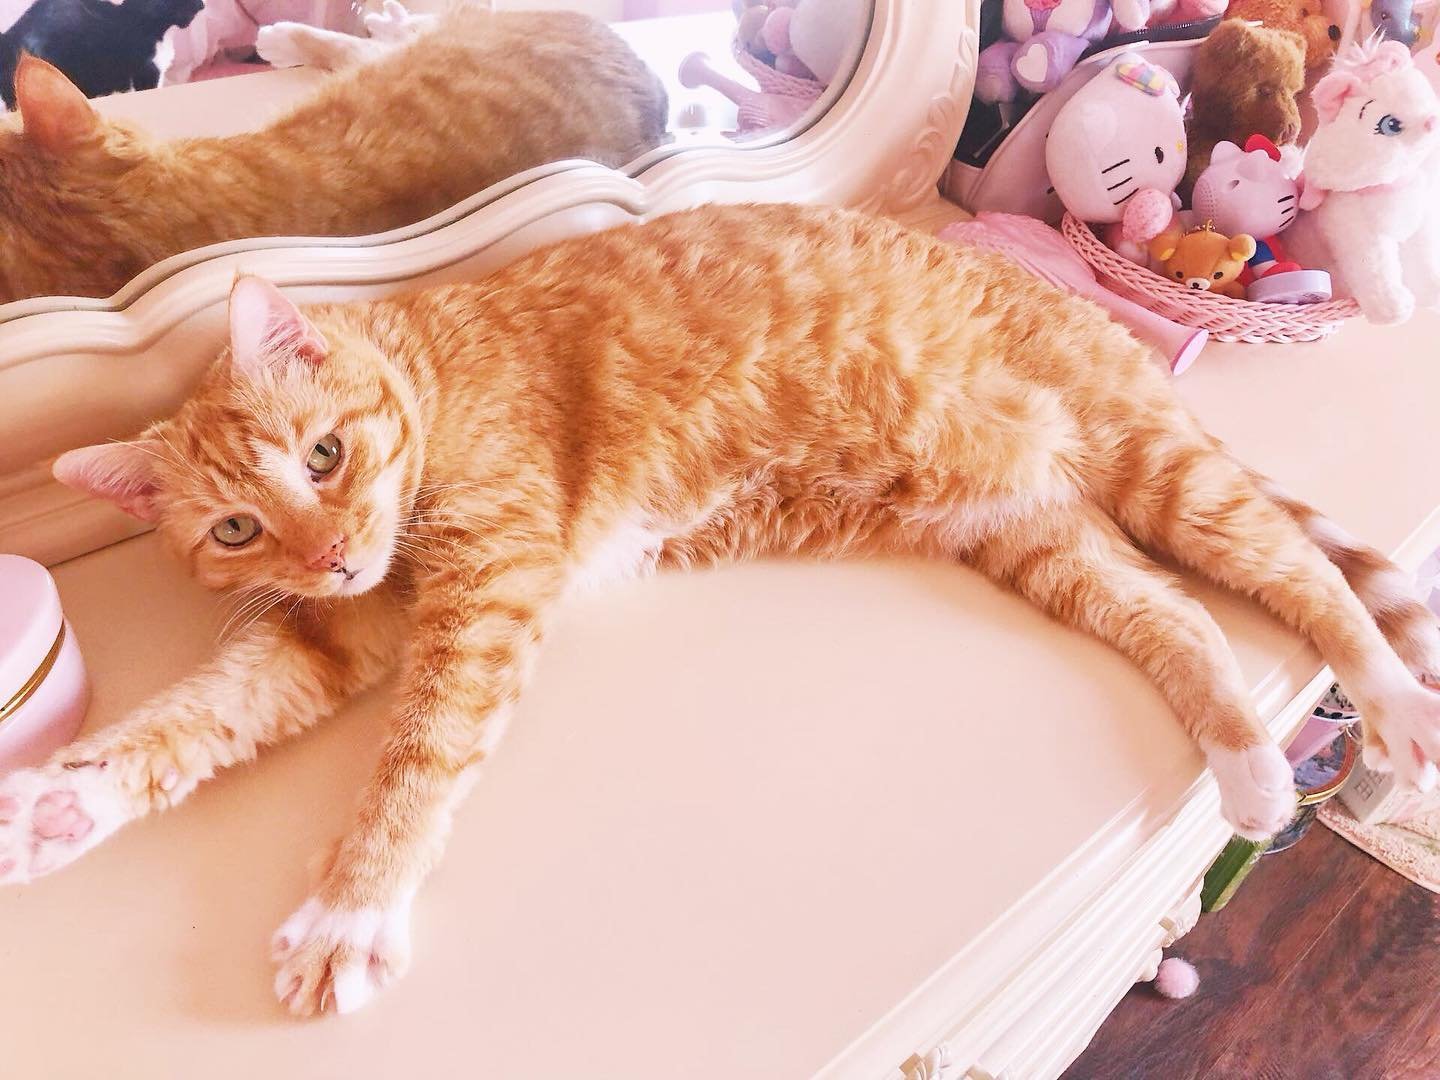 ᡣ𐭩 &bull;｡ꪆৎ ˚ &sdot;Zeus. My baby boy stretching.  ᡣ𐭩 &bull;｡ꪆৎ ˚&sdot; Do you have kitties? What about an orange tabby like my Zeus? How many? 🐱🎀🐱🎀🐱 He&rsquo;s the love of my life and the best thing that ever happened to me. 
.
#margaritablo